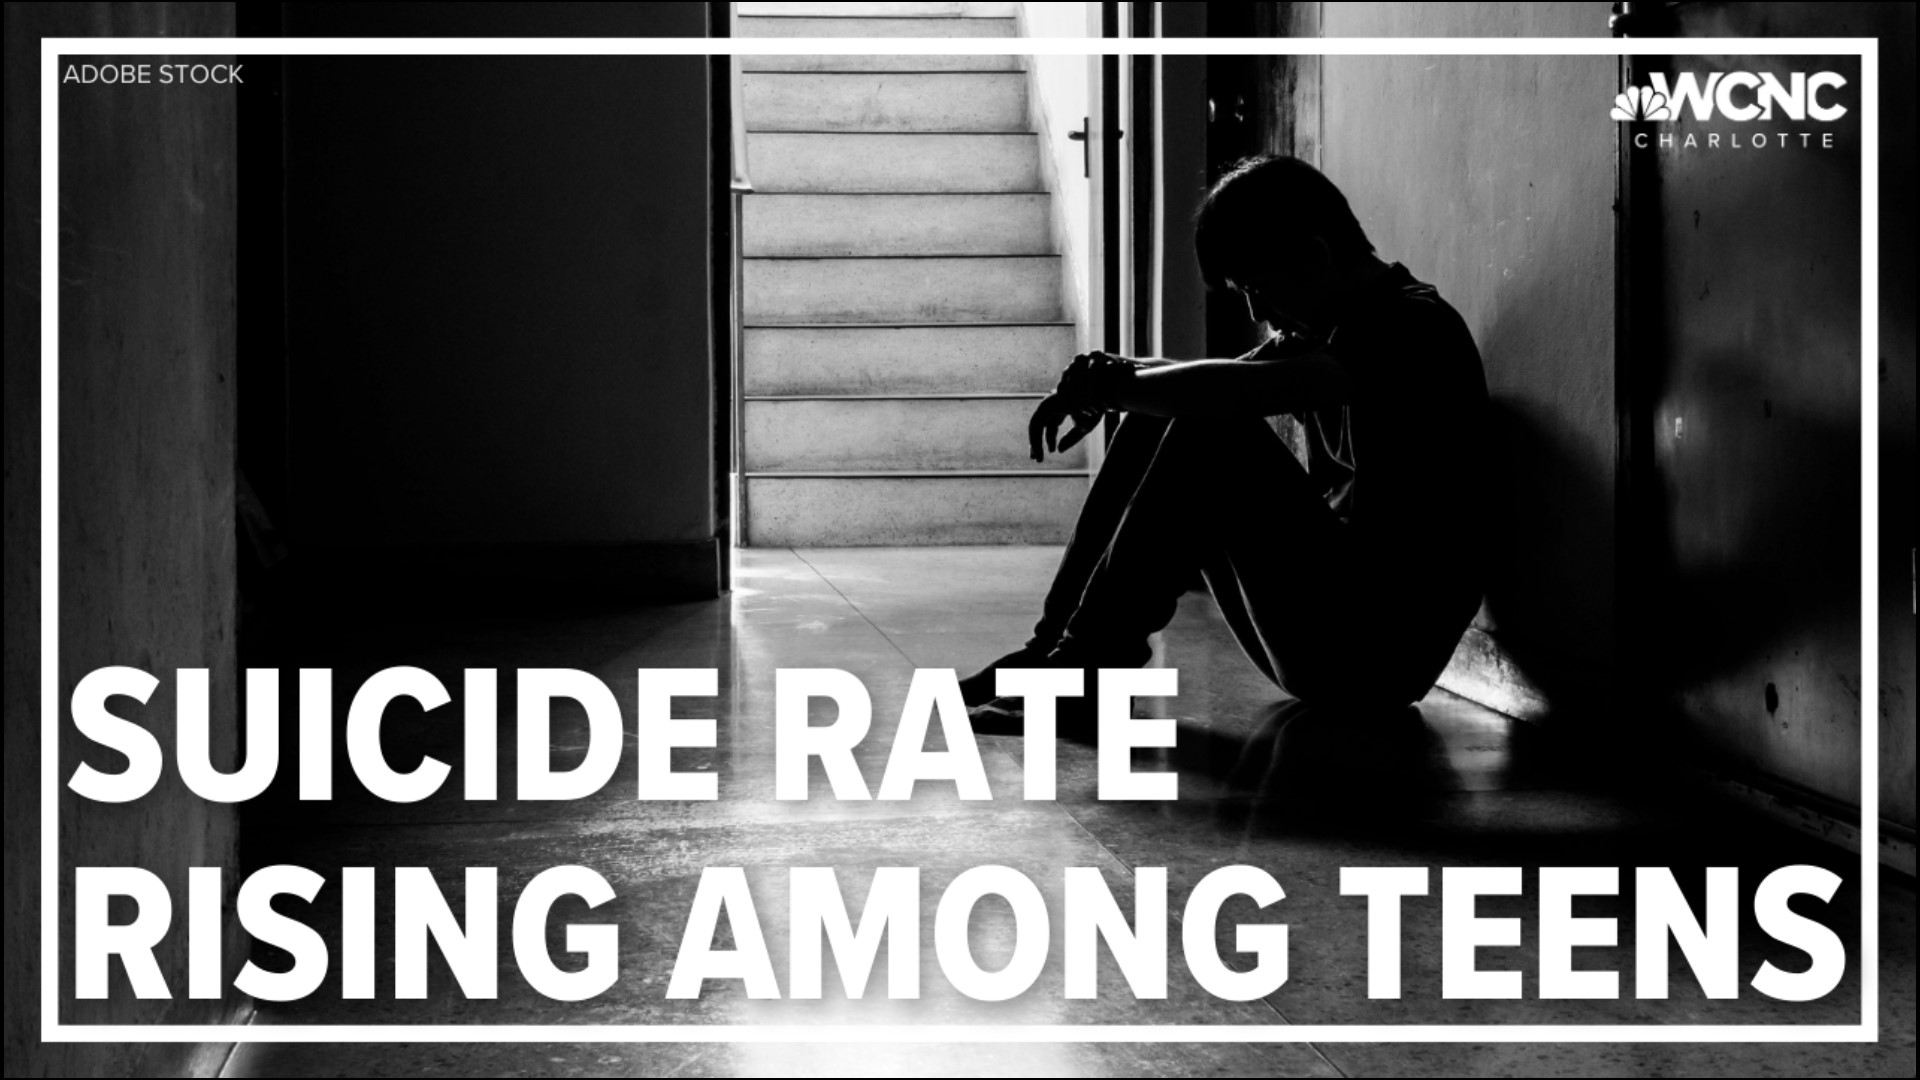 The North Carolina Child Fatality Task Force found the suicide rate among kids ages 10 to 17 is at the highest it's been in two decades.